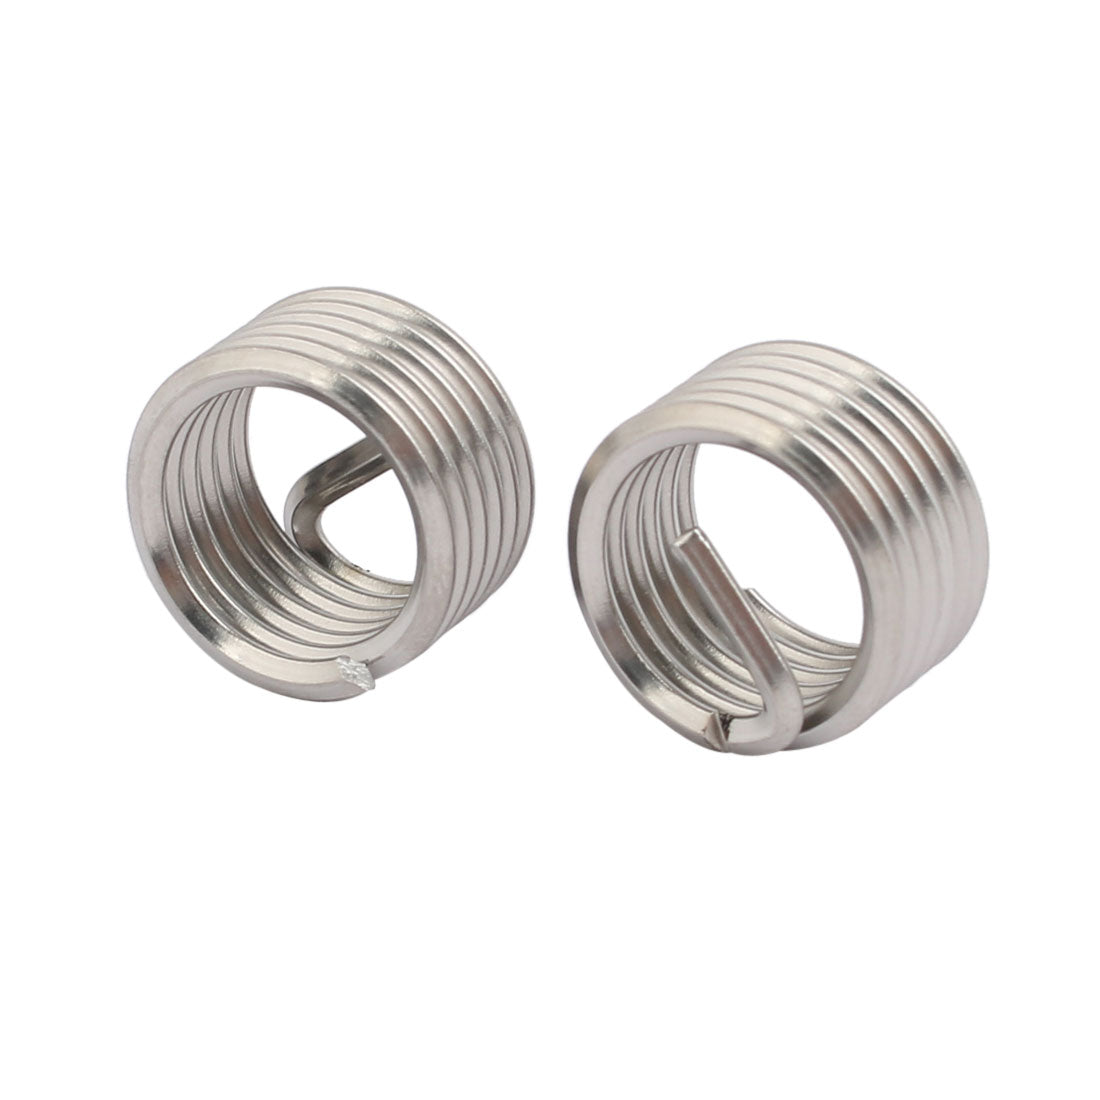 uxcell Uxcell M16x2mmx16mm 304 Stainless Steel Helical Coil Wire Thread Insert 12pcs